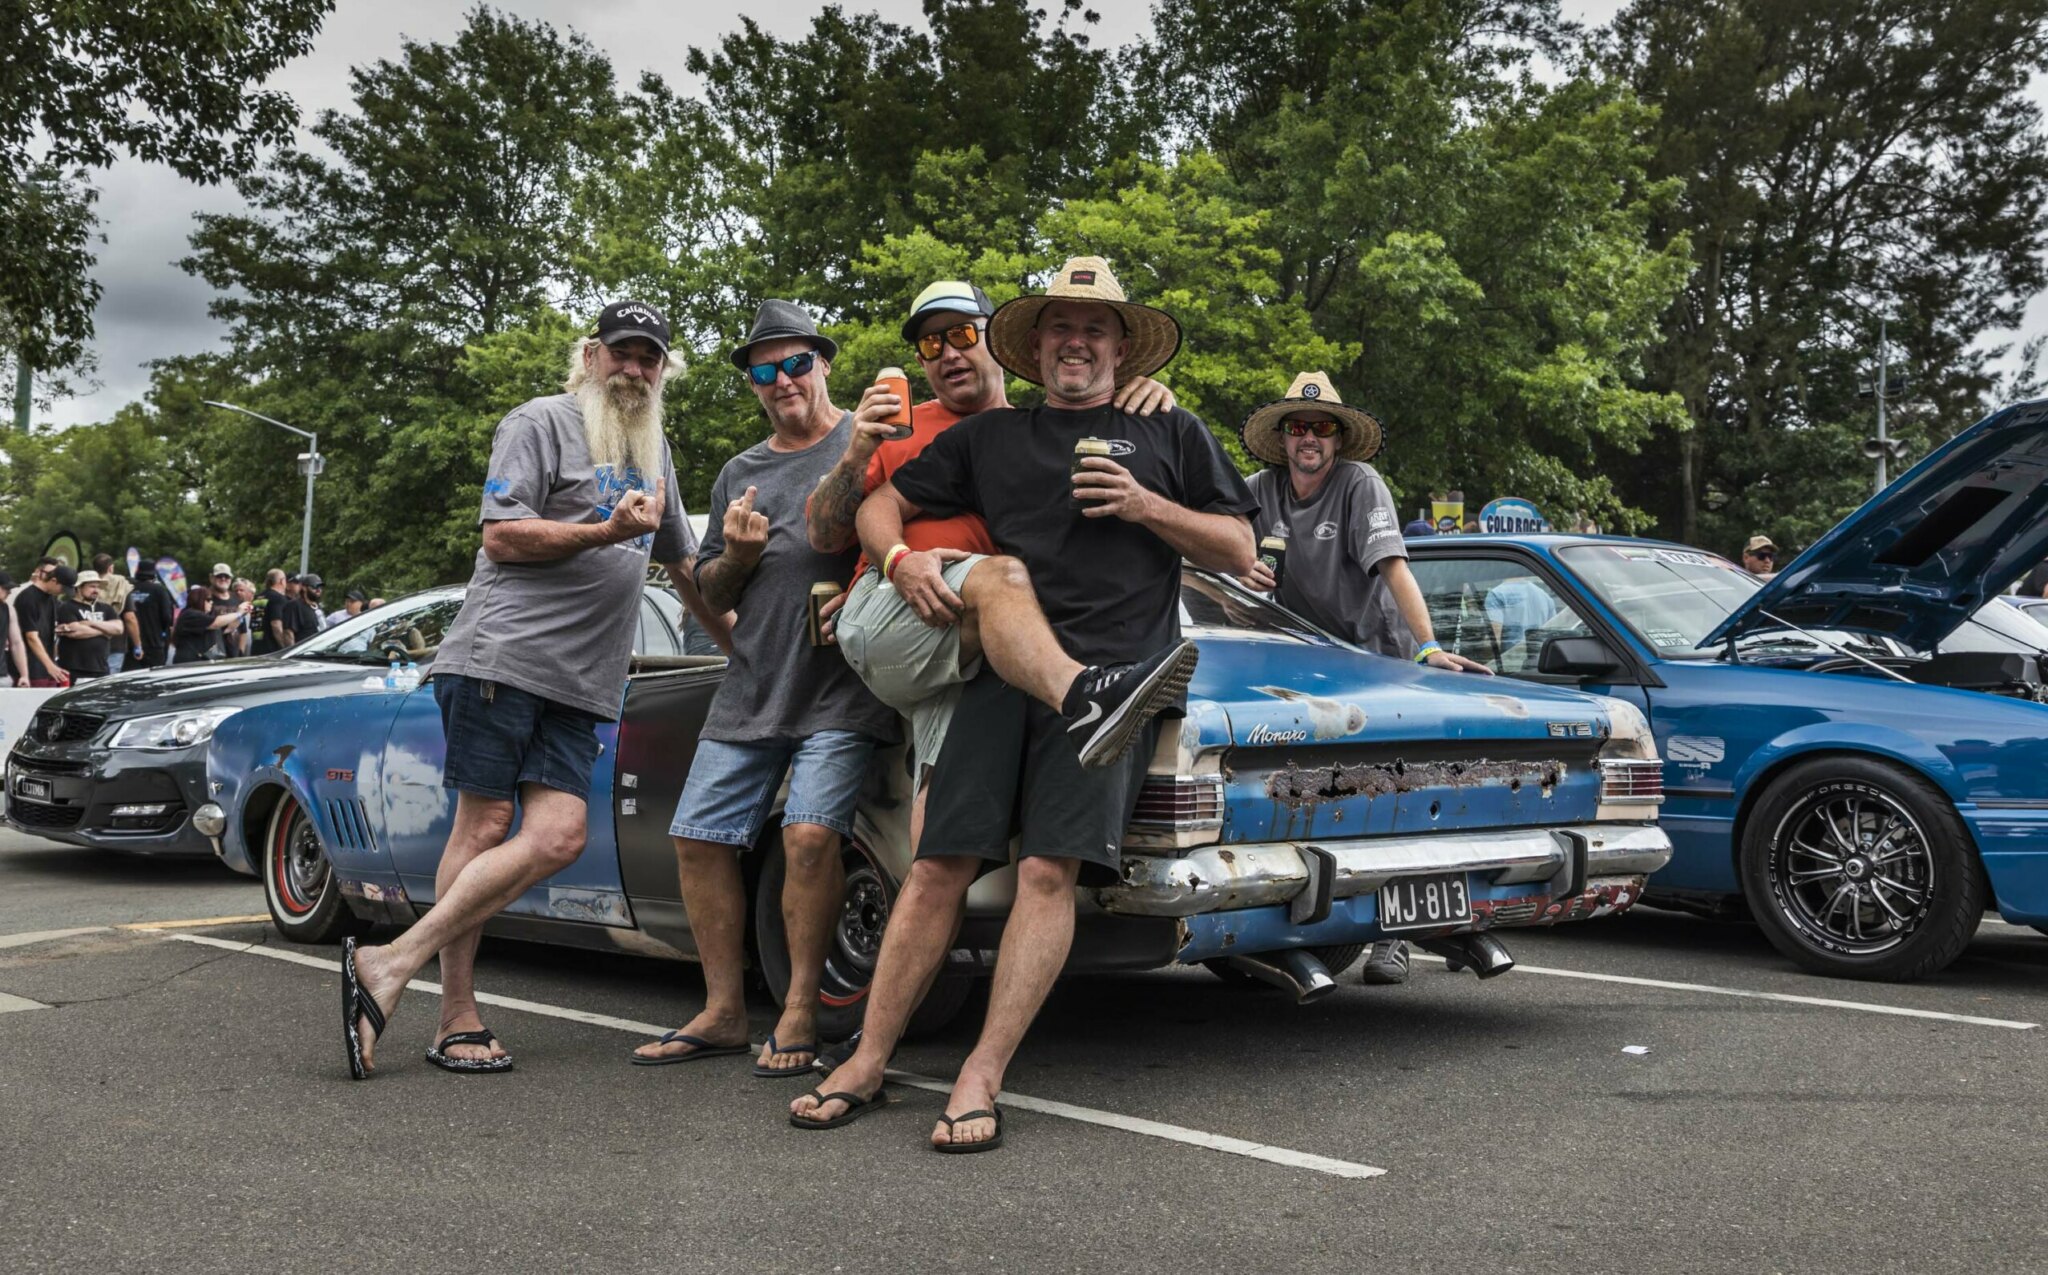 The Armidale Motor Show is back! And for a great cause